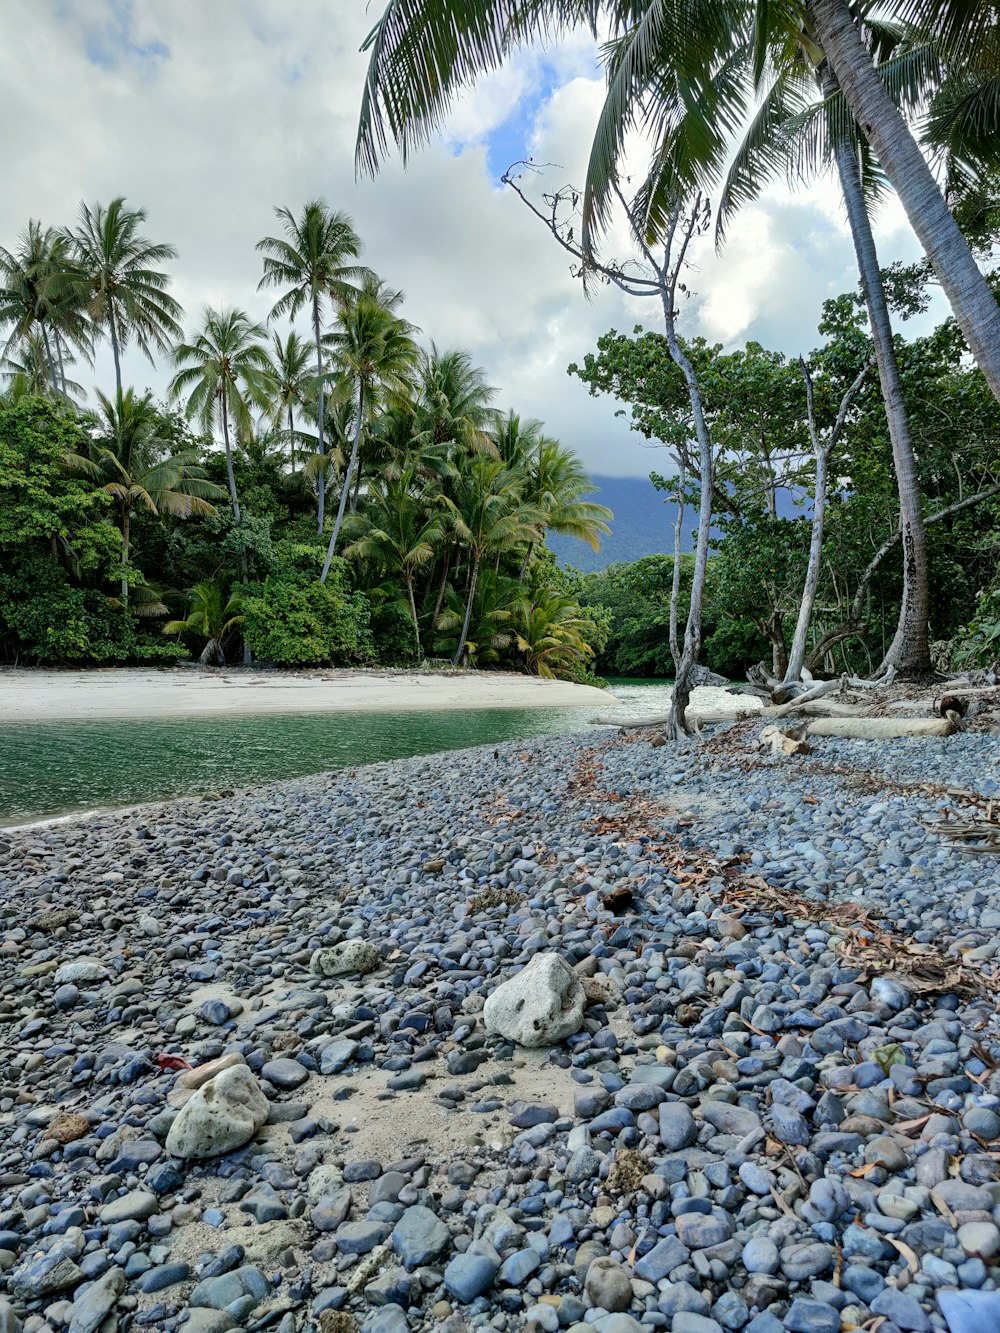 a rocky beach with palm trees in the background